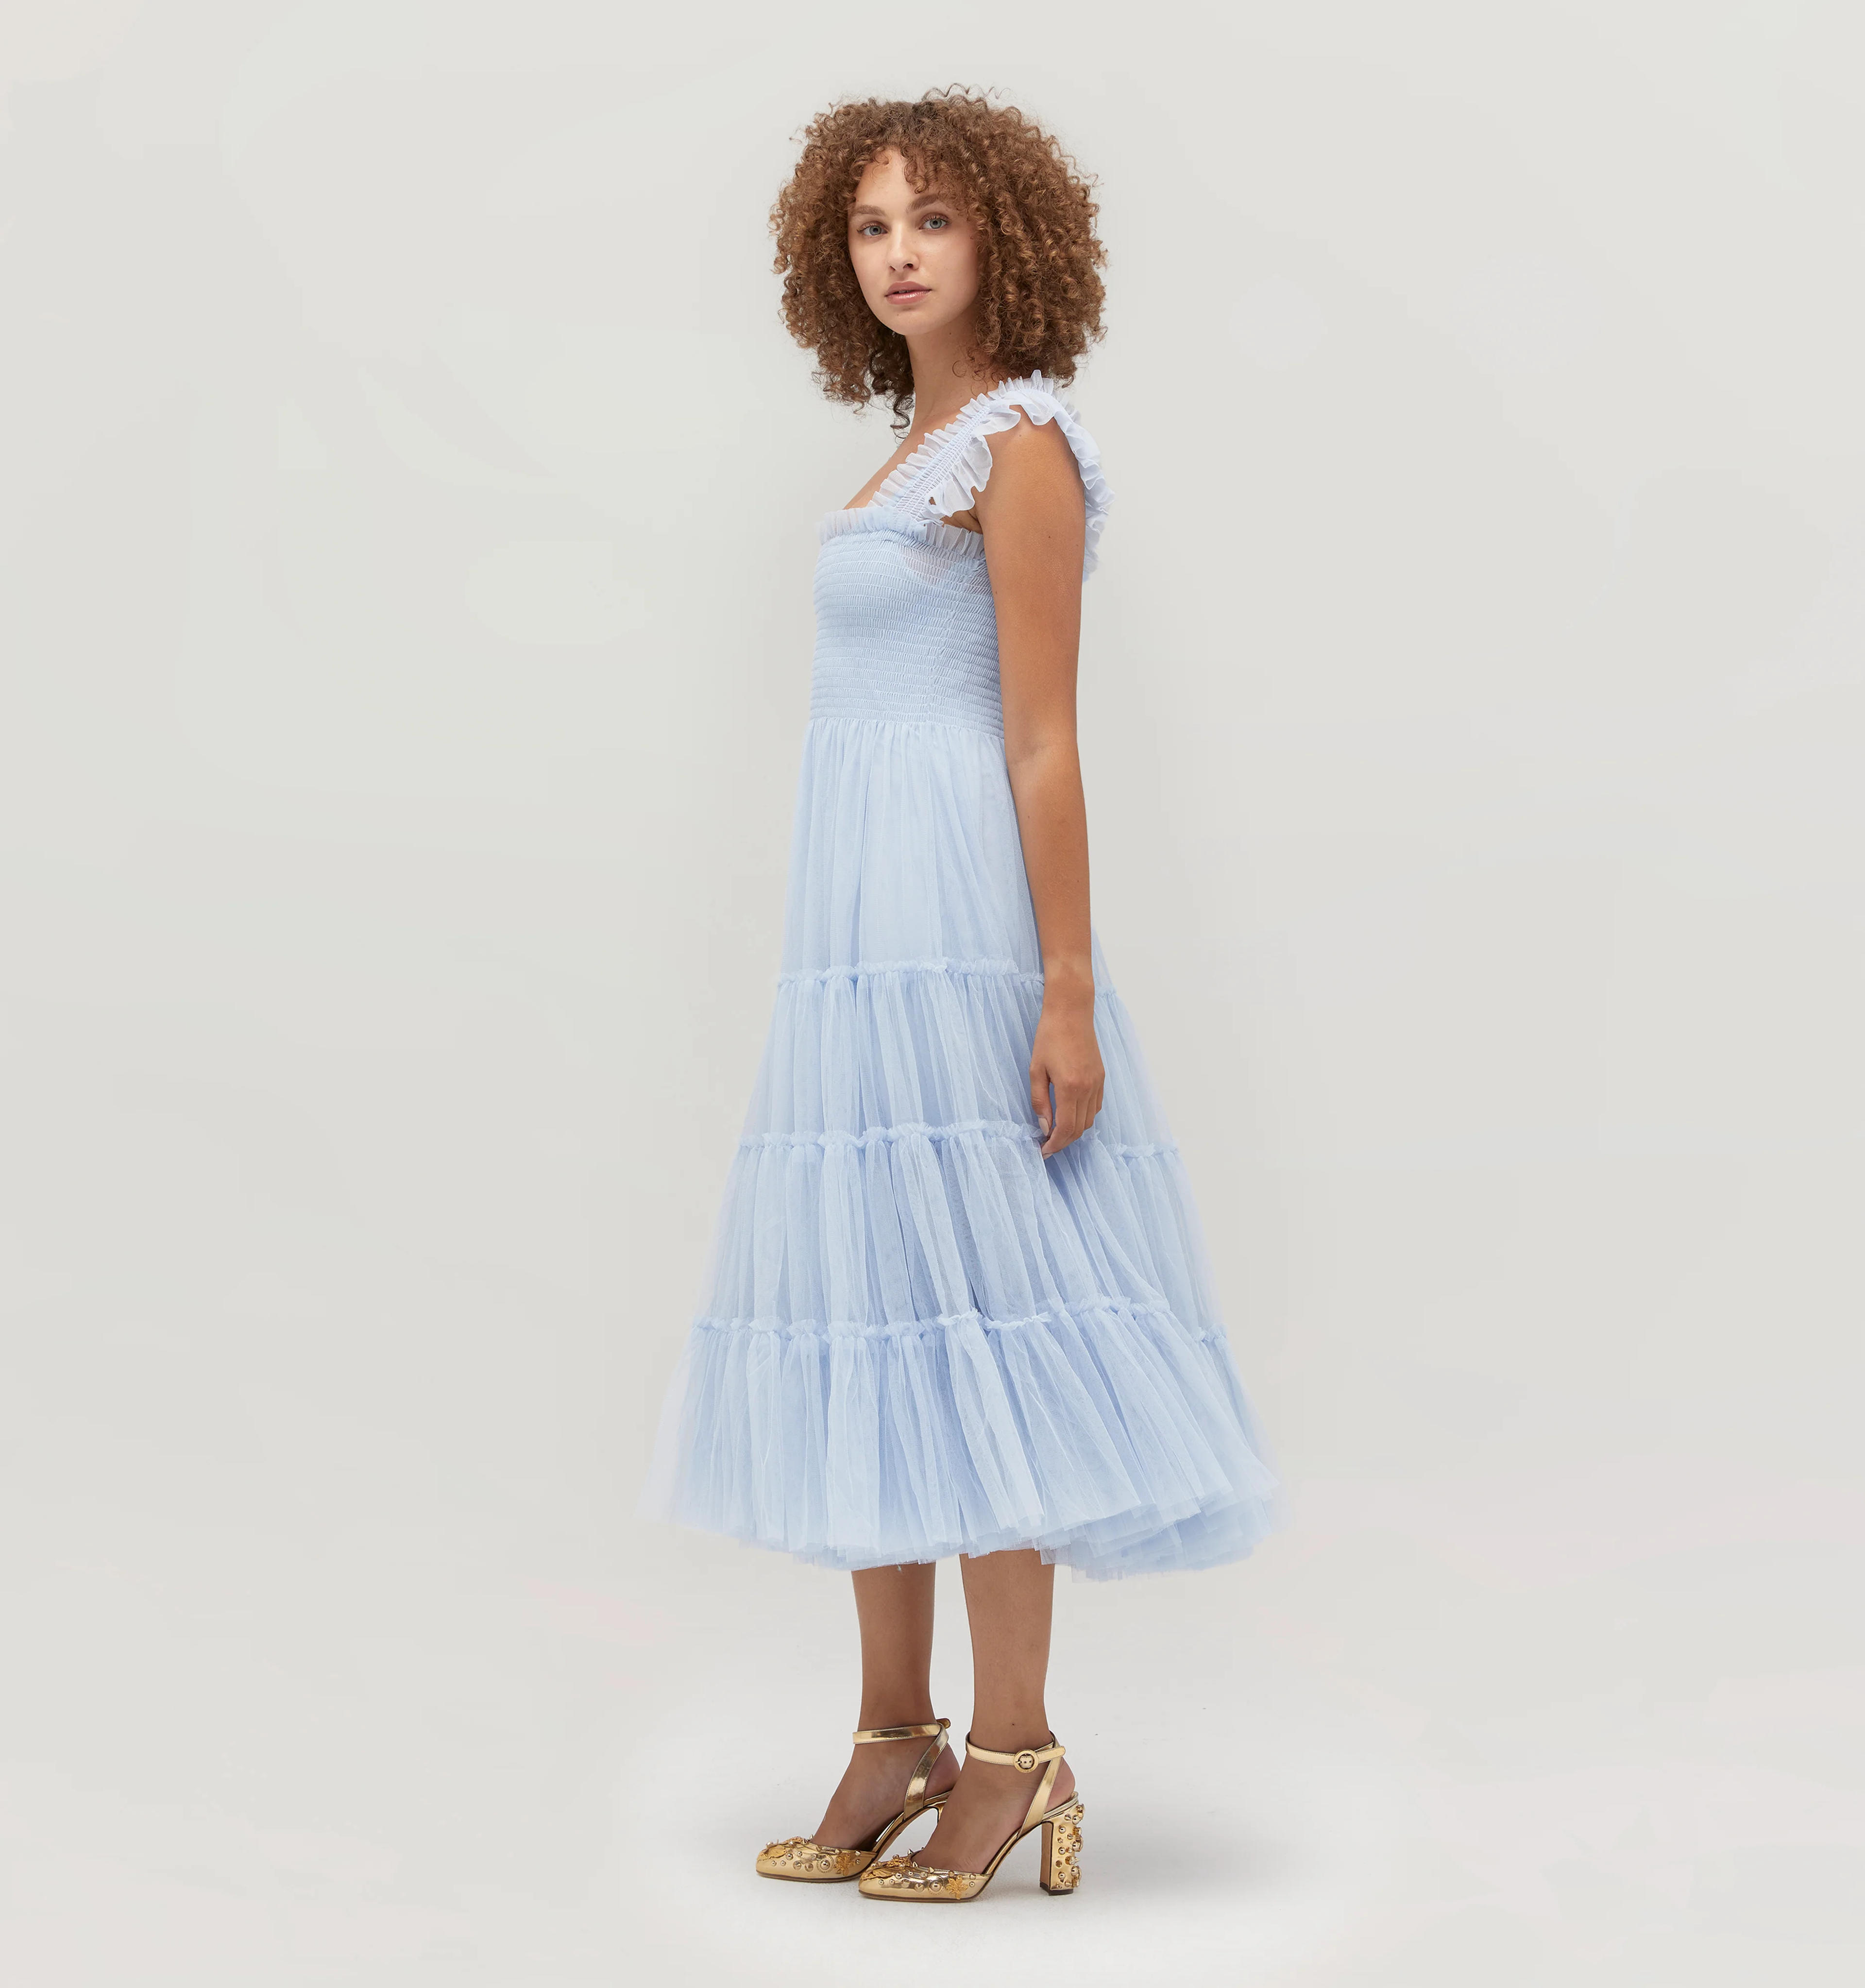 The Tulle Ellie Nap Dress - Powder Blue Tulle – Hill House Home